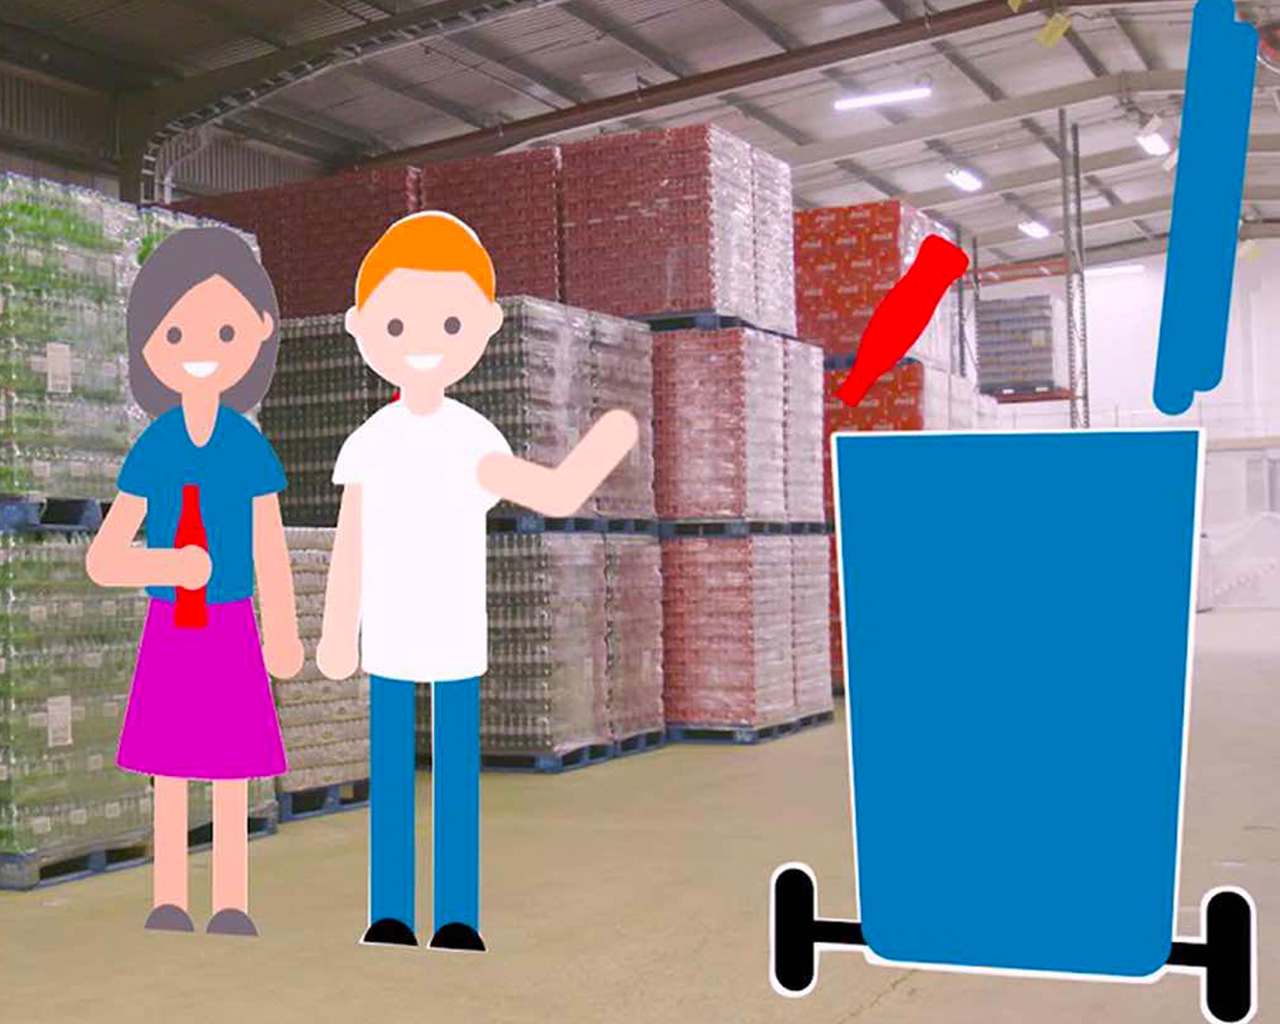 A Coca-Cola distribution center with the illustration of a man and a woman. The woman is holding a red bottle and the man is throwing a red bottle in a blue trash can